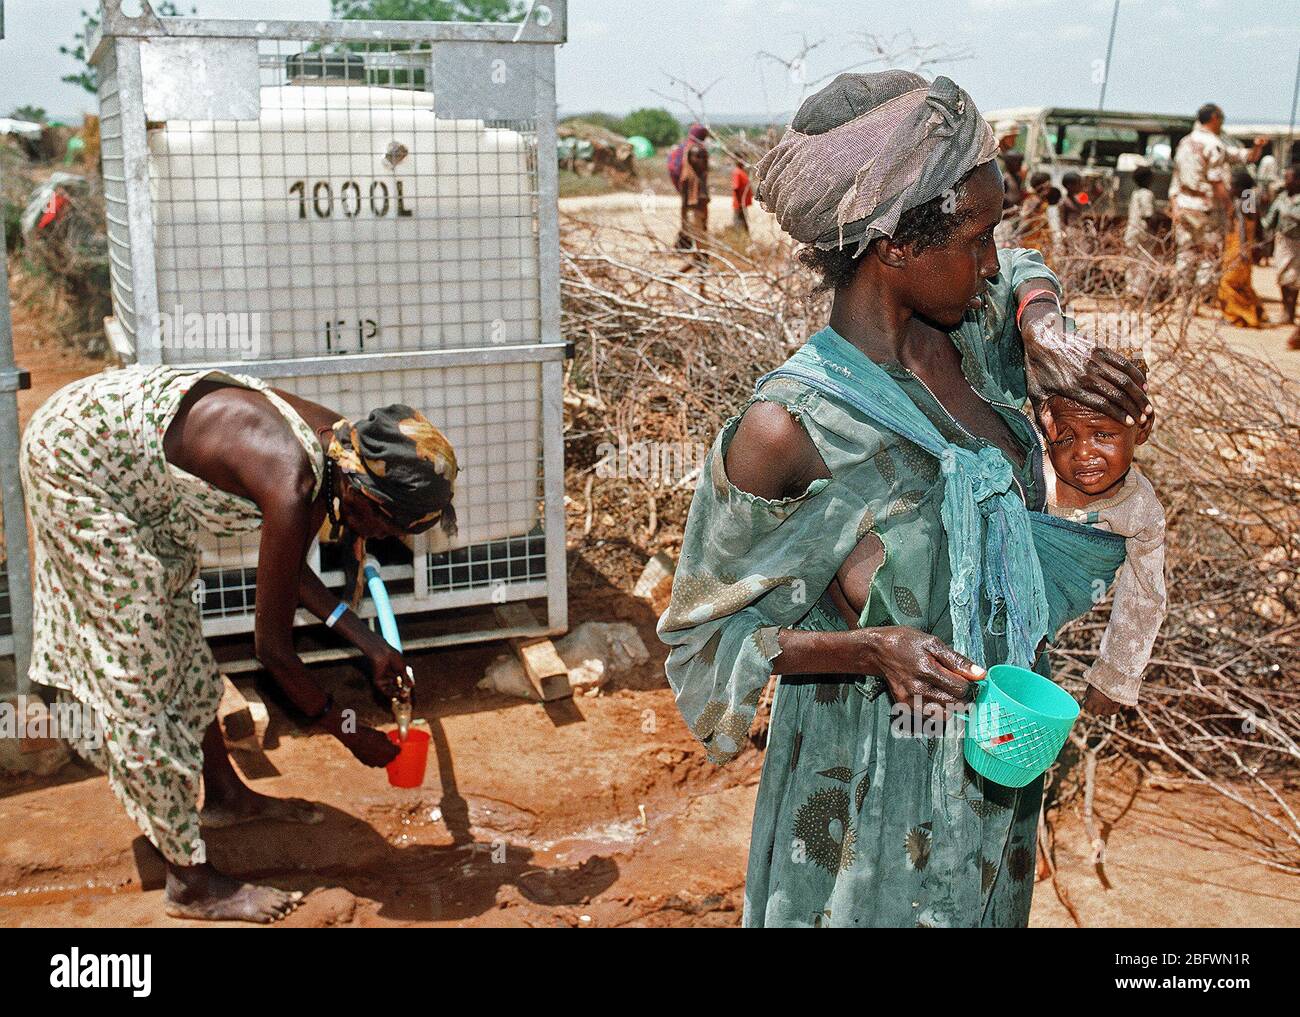 A Somali refugee woman holds her child as another woman gets water from a dispenser in the background at an aid station set up during Operation Restore Hope relief efforts. Stock Photo